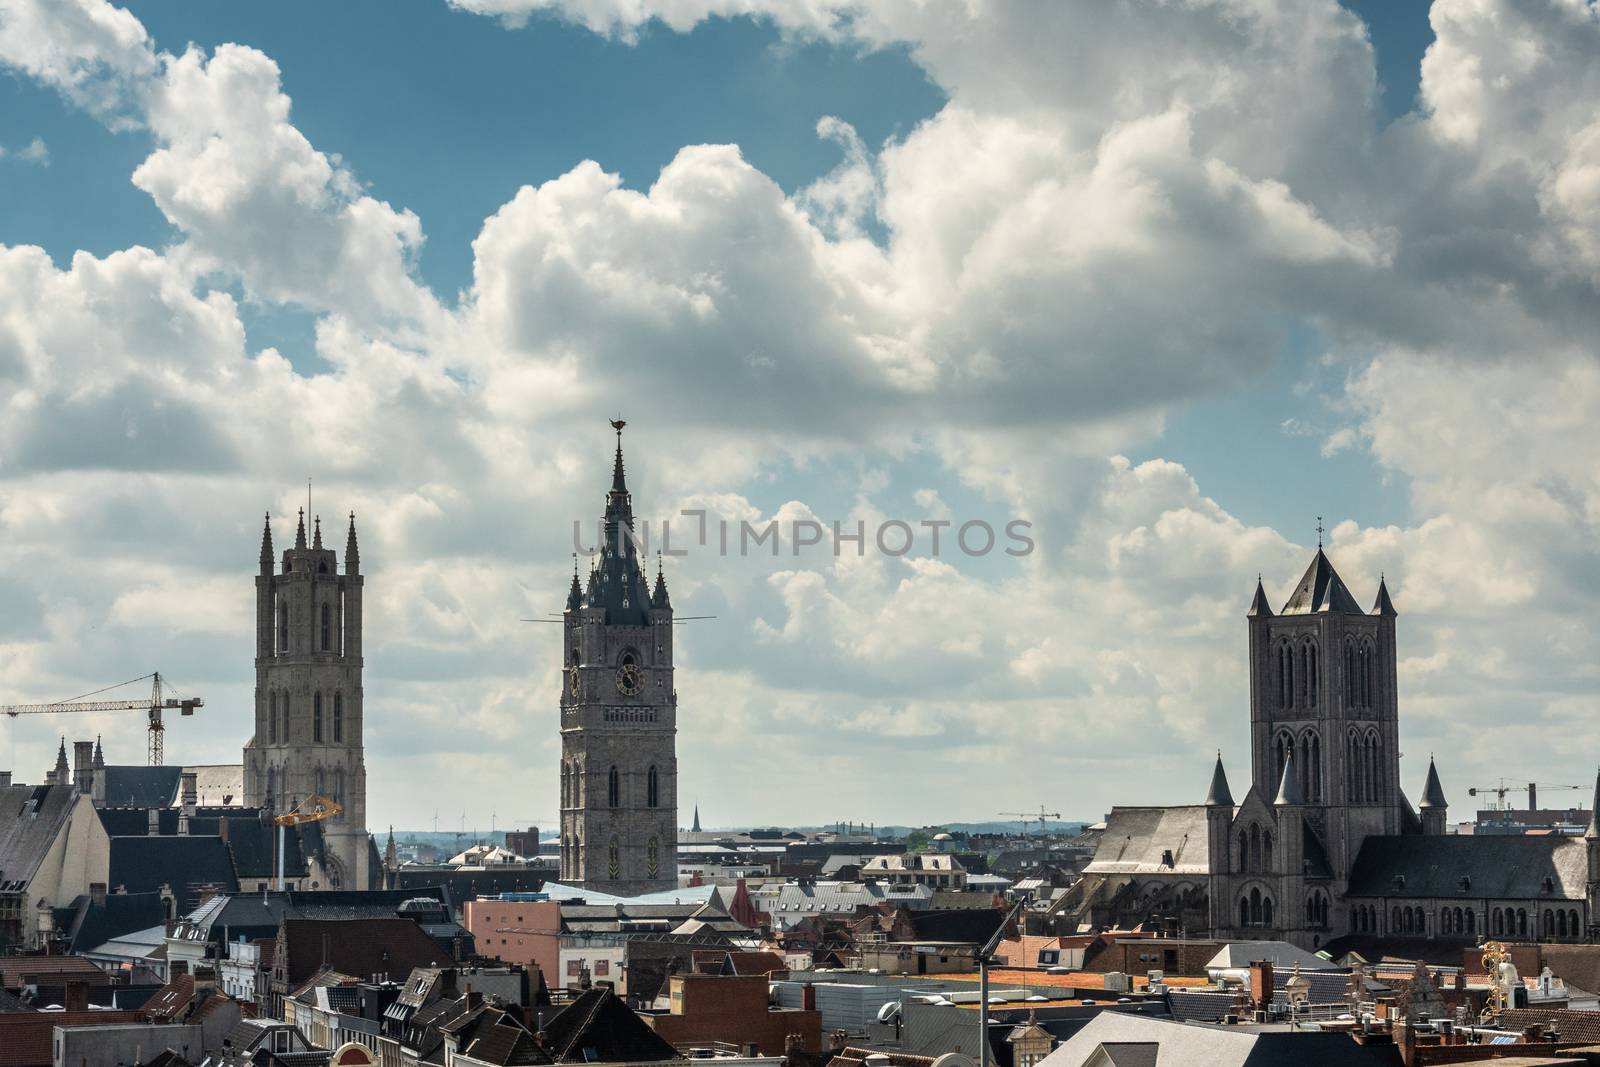 Gent, Flanders, Belgium -  June 21, 2019: Shot from castle tower, view over city roofs shows three most important and historic towers of Belfry, Cathedral and Sint Niklaas church under heavy cloudscape with blue patches.